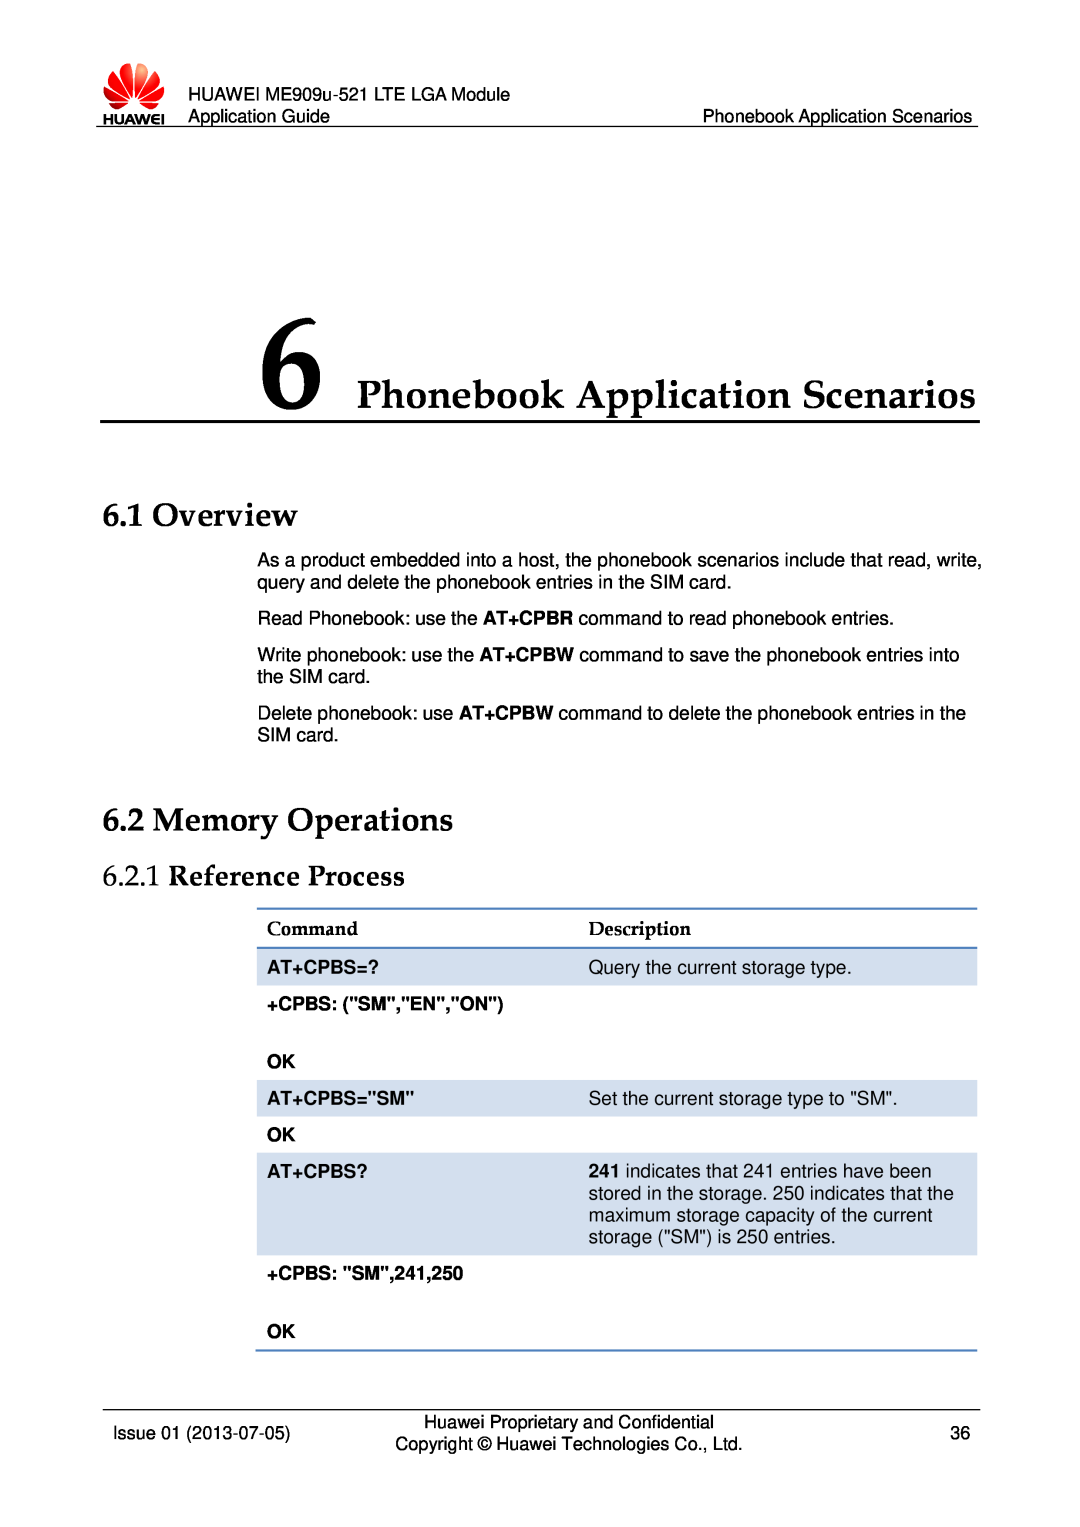 Huawei ME909u-521 manual Phonebook Application Scenarios, Overview, Memory Operations, Reference Process 